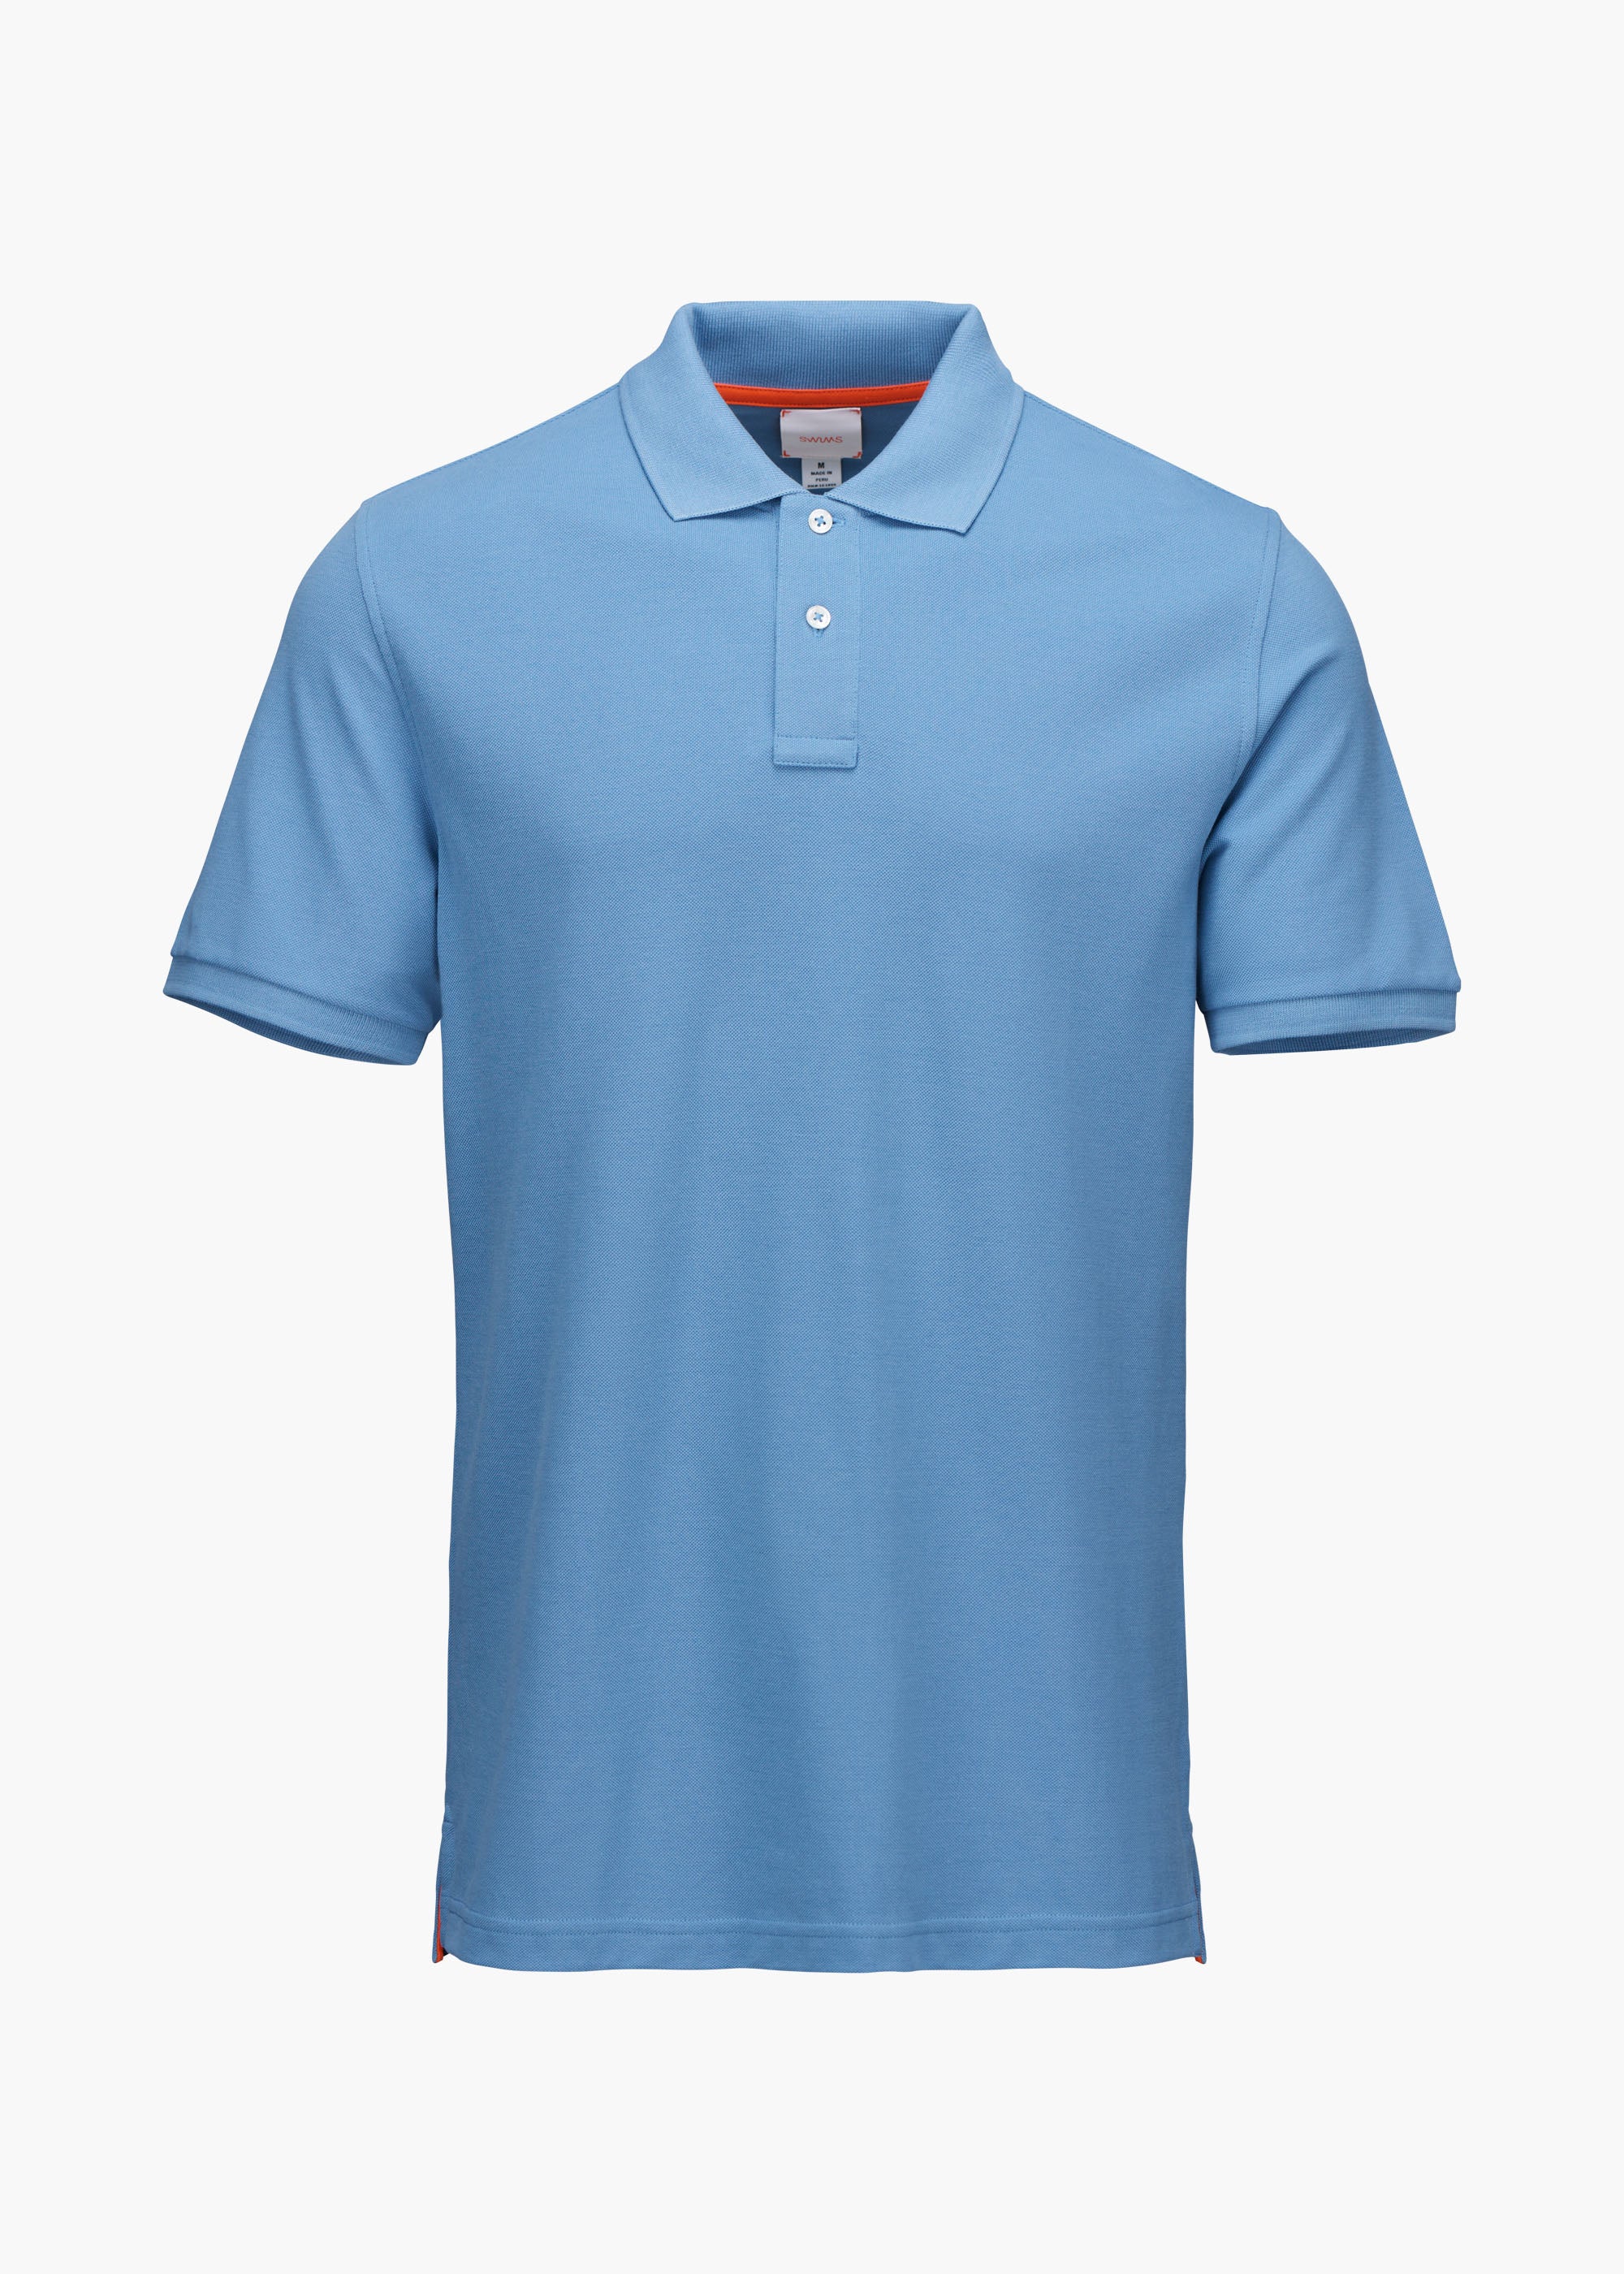 Sunnmore Polo - background::white,variant::Arctic Blue